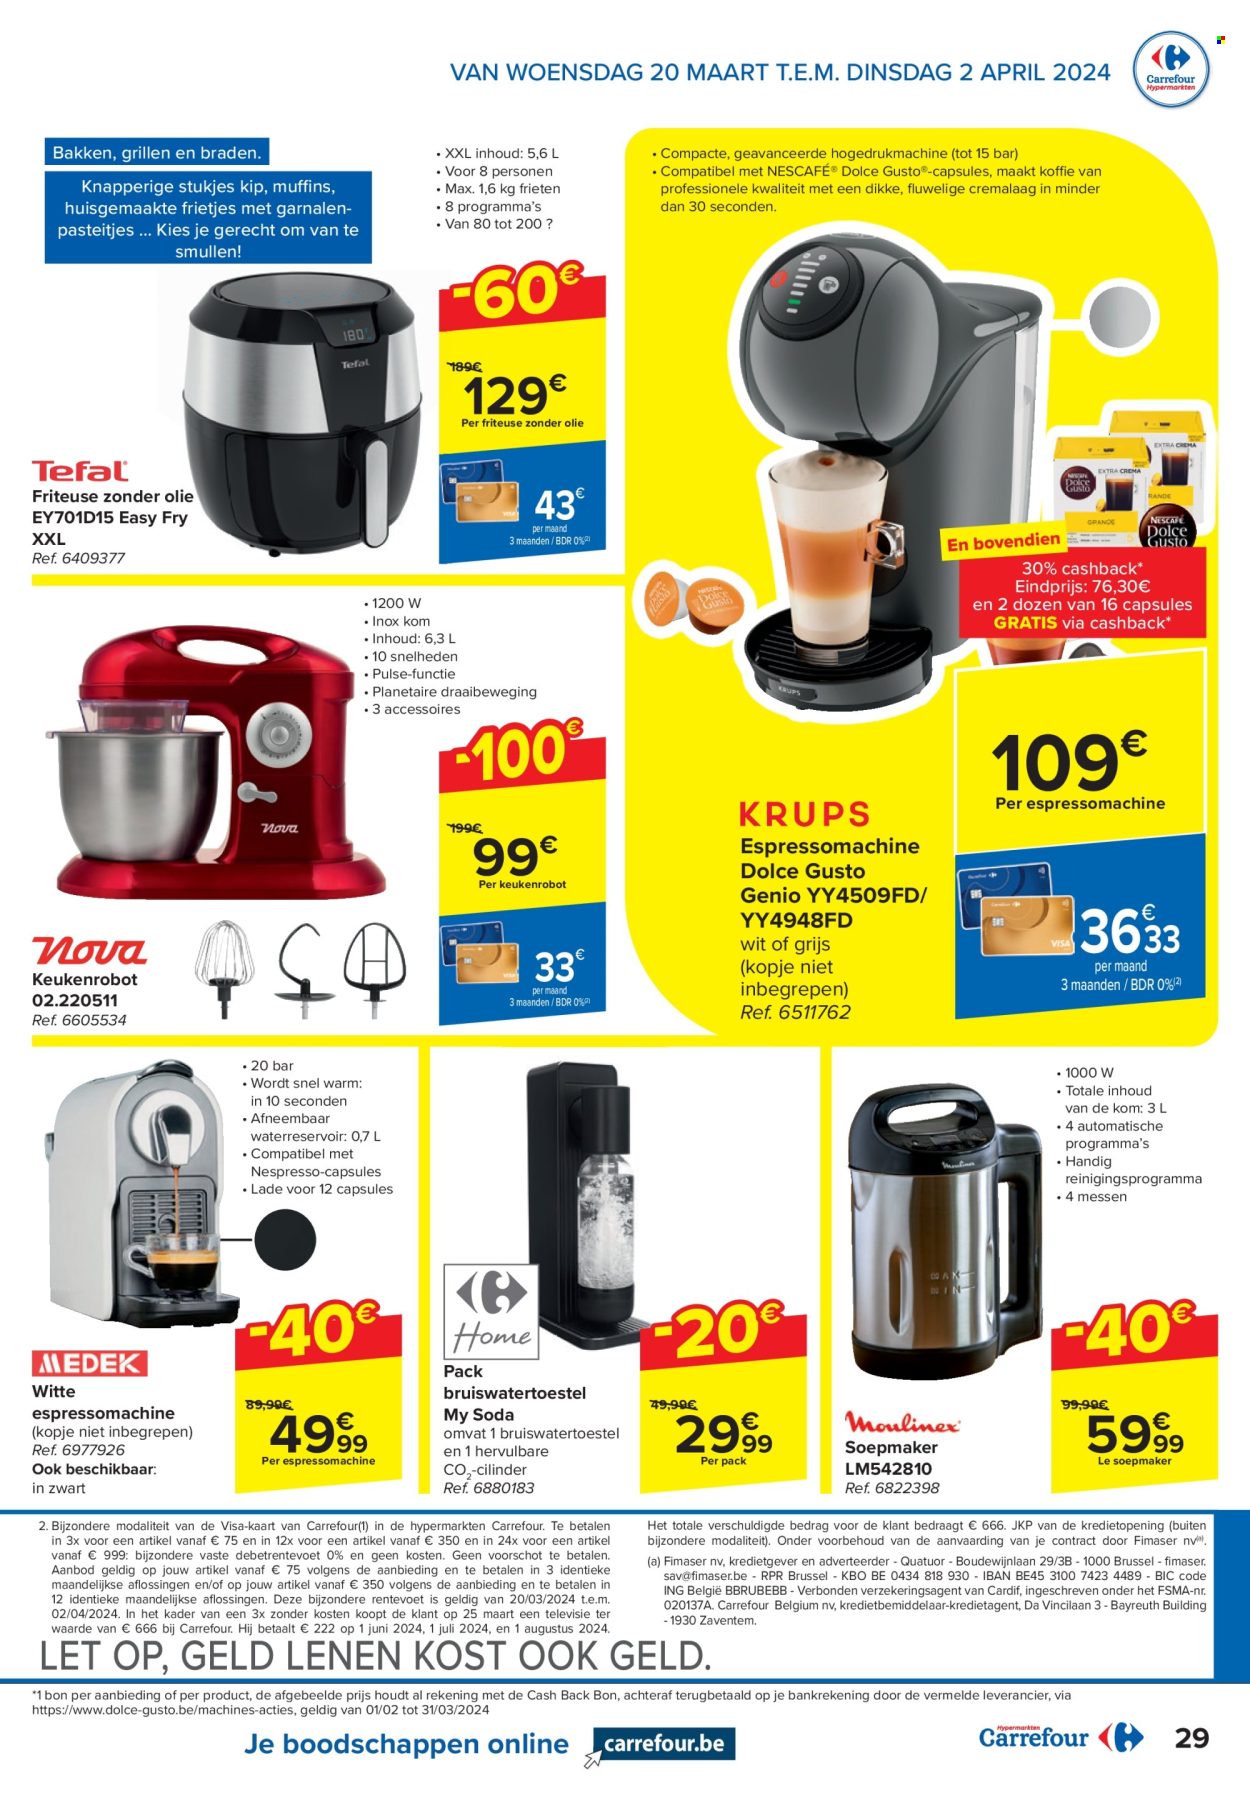 Catalogue Carrefour hypermarkt - 20.3.2024 - 2.4.2024. Page 29.